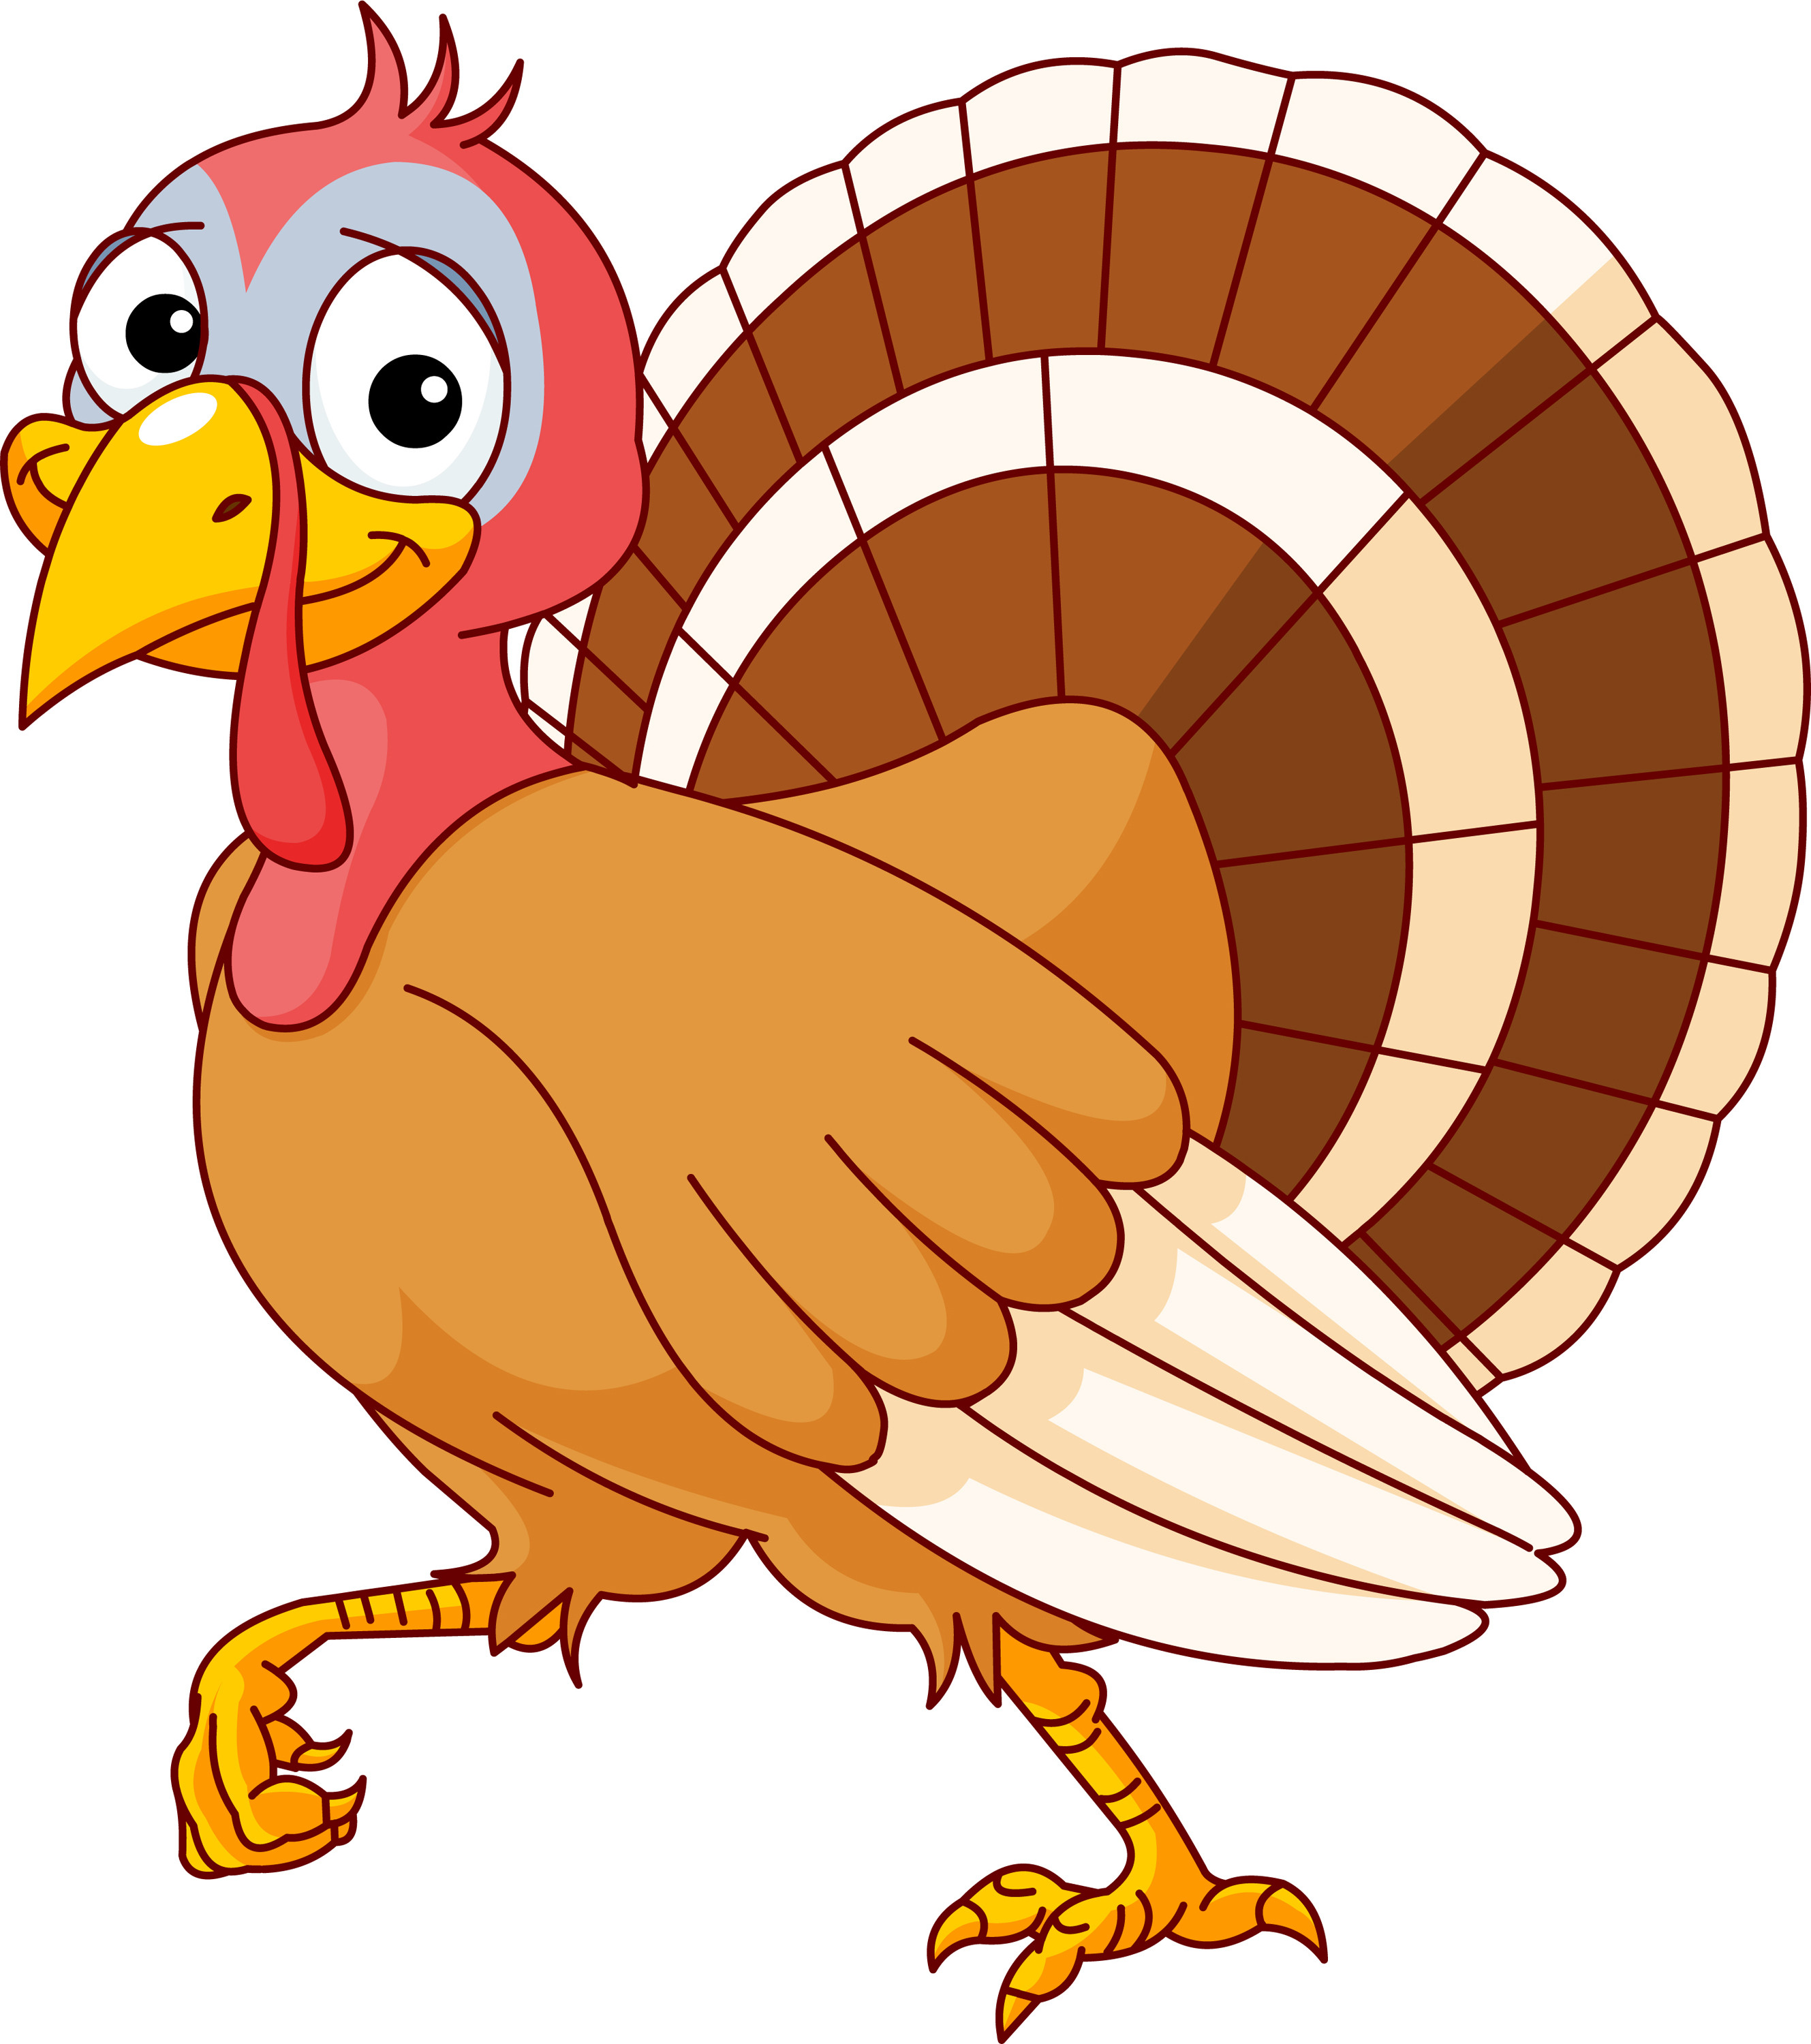 Picture Of Thanksgiving Turkey
 Day 6 Write a letter as a turkey convincing people to